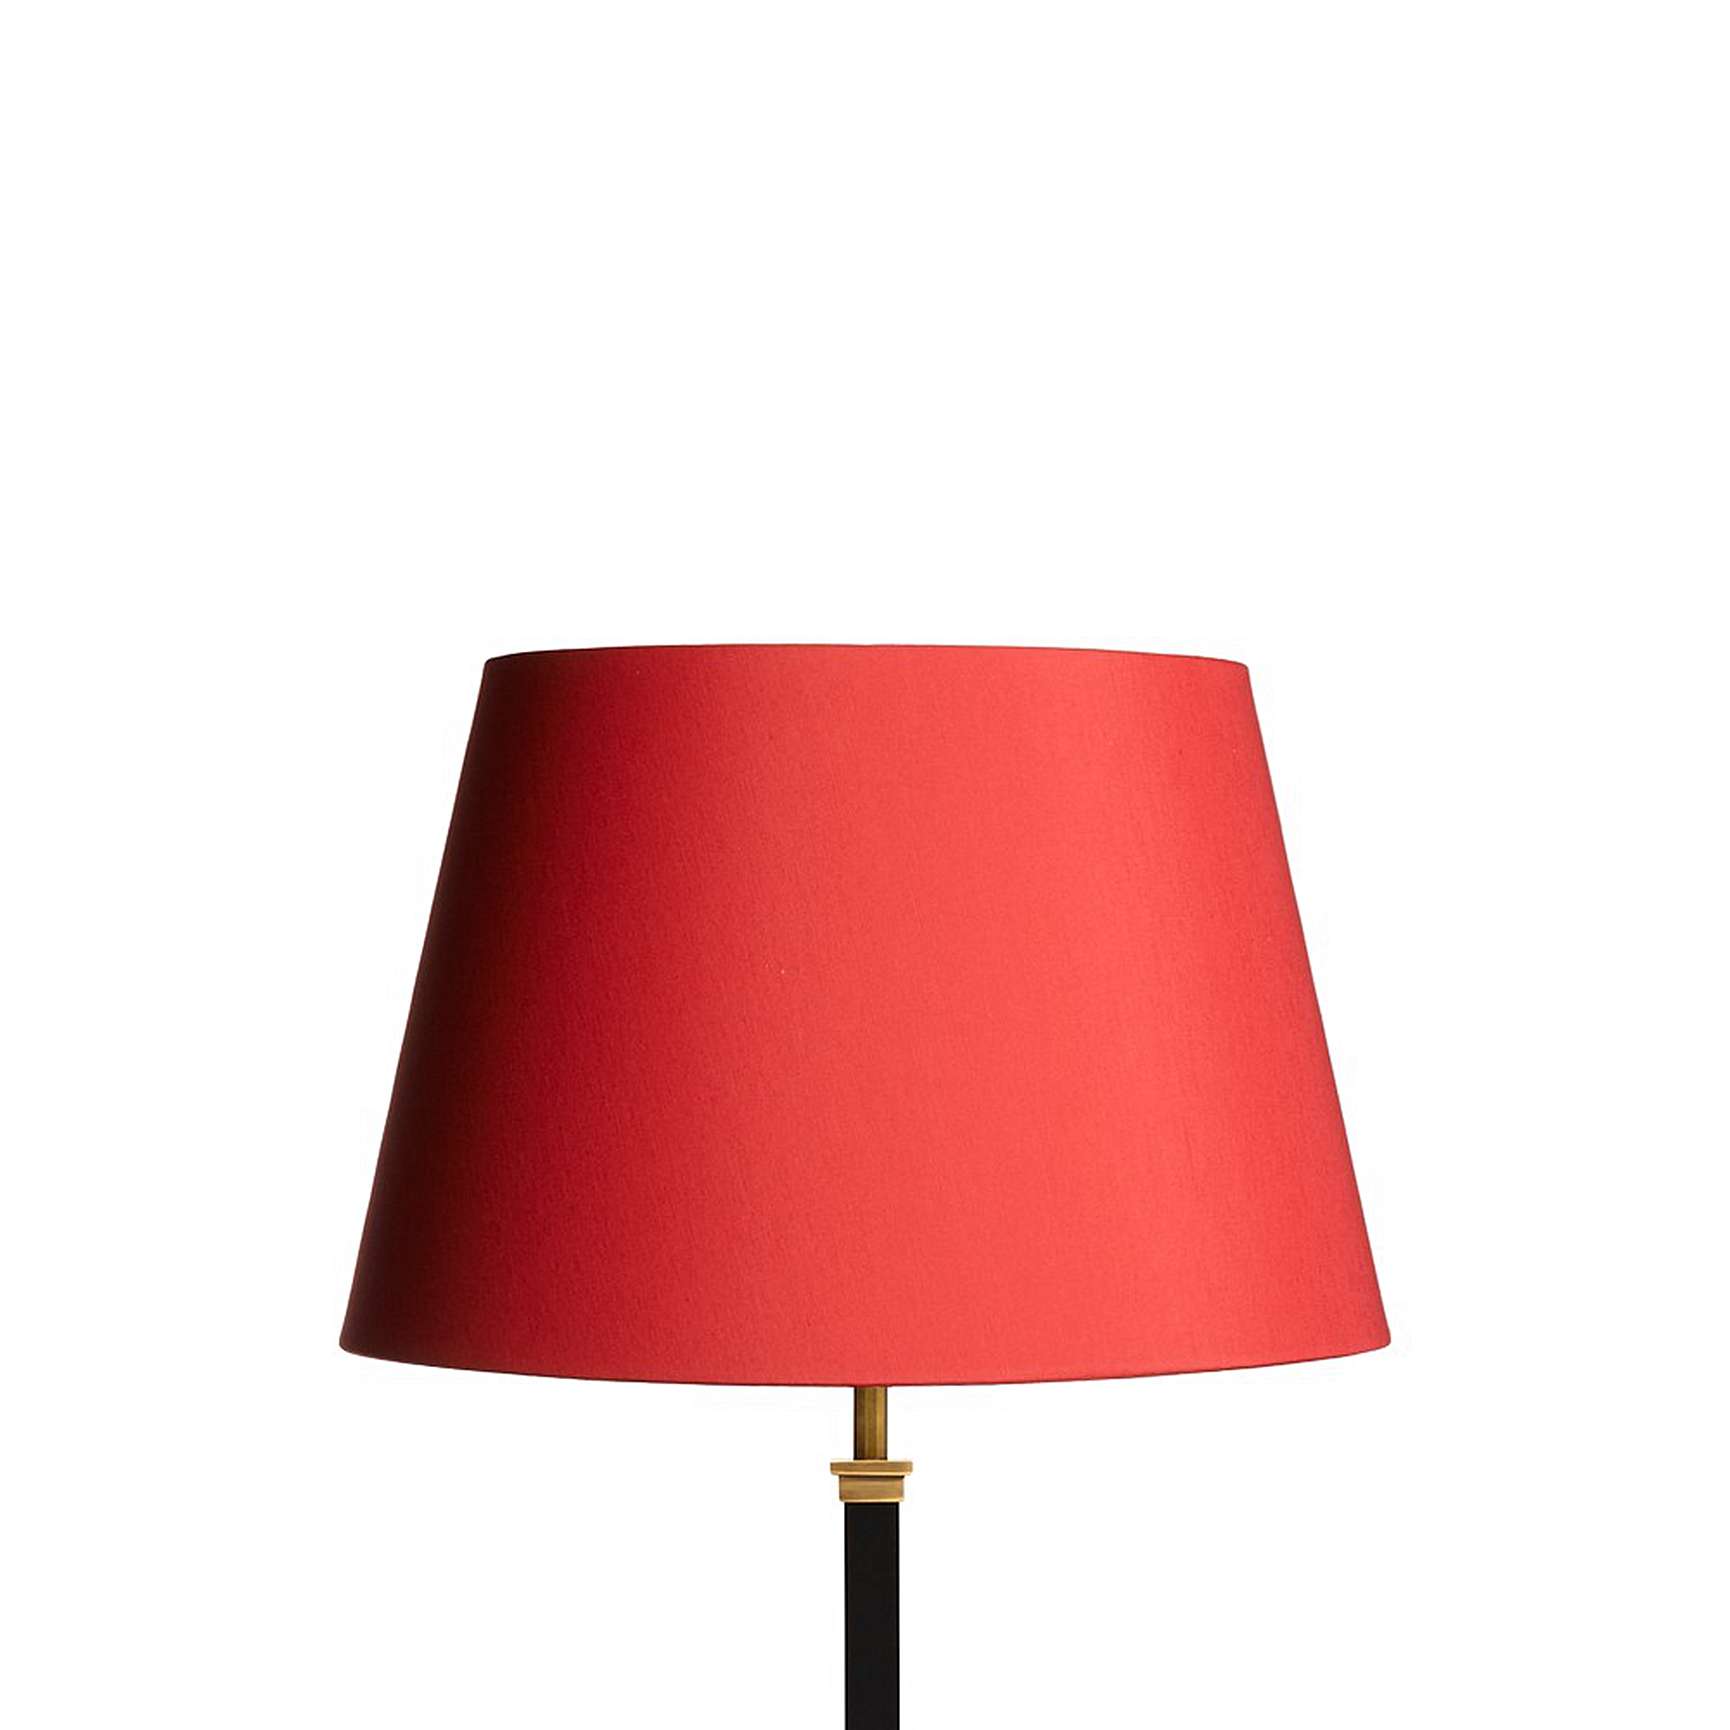 35cm Straight Empire shade in red silk with Glasgow gold interior - No.42 Interiors